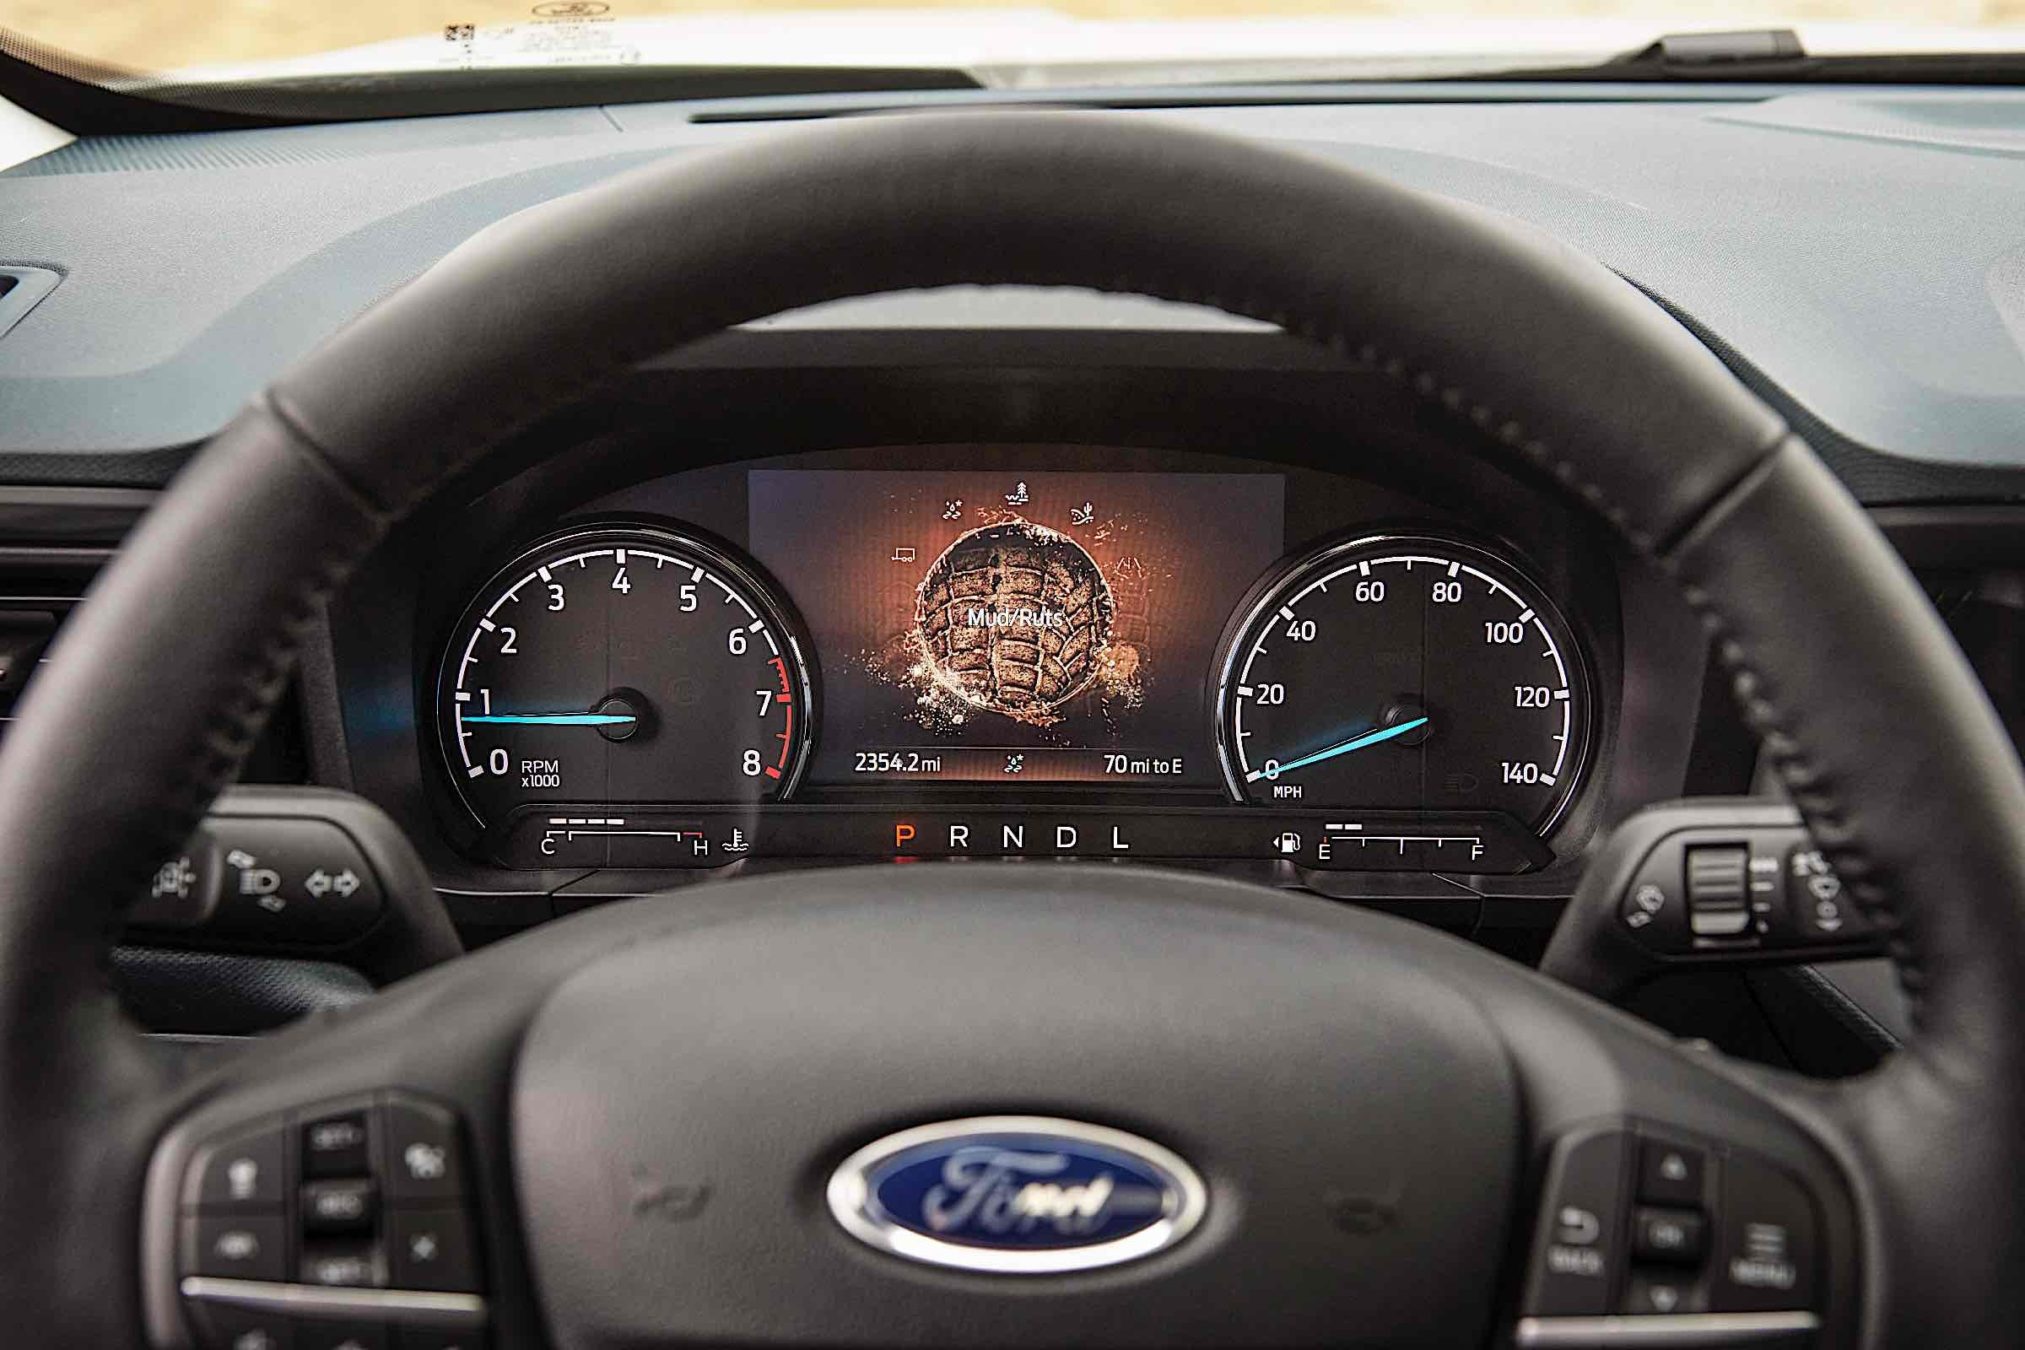 The dashboard display of a 2023 Ford Maverick truck showing mud/rut terrain enabled.